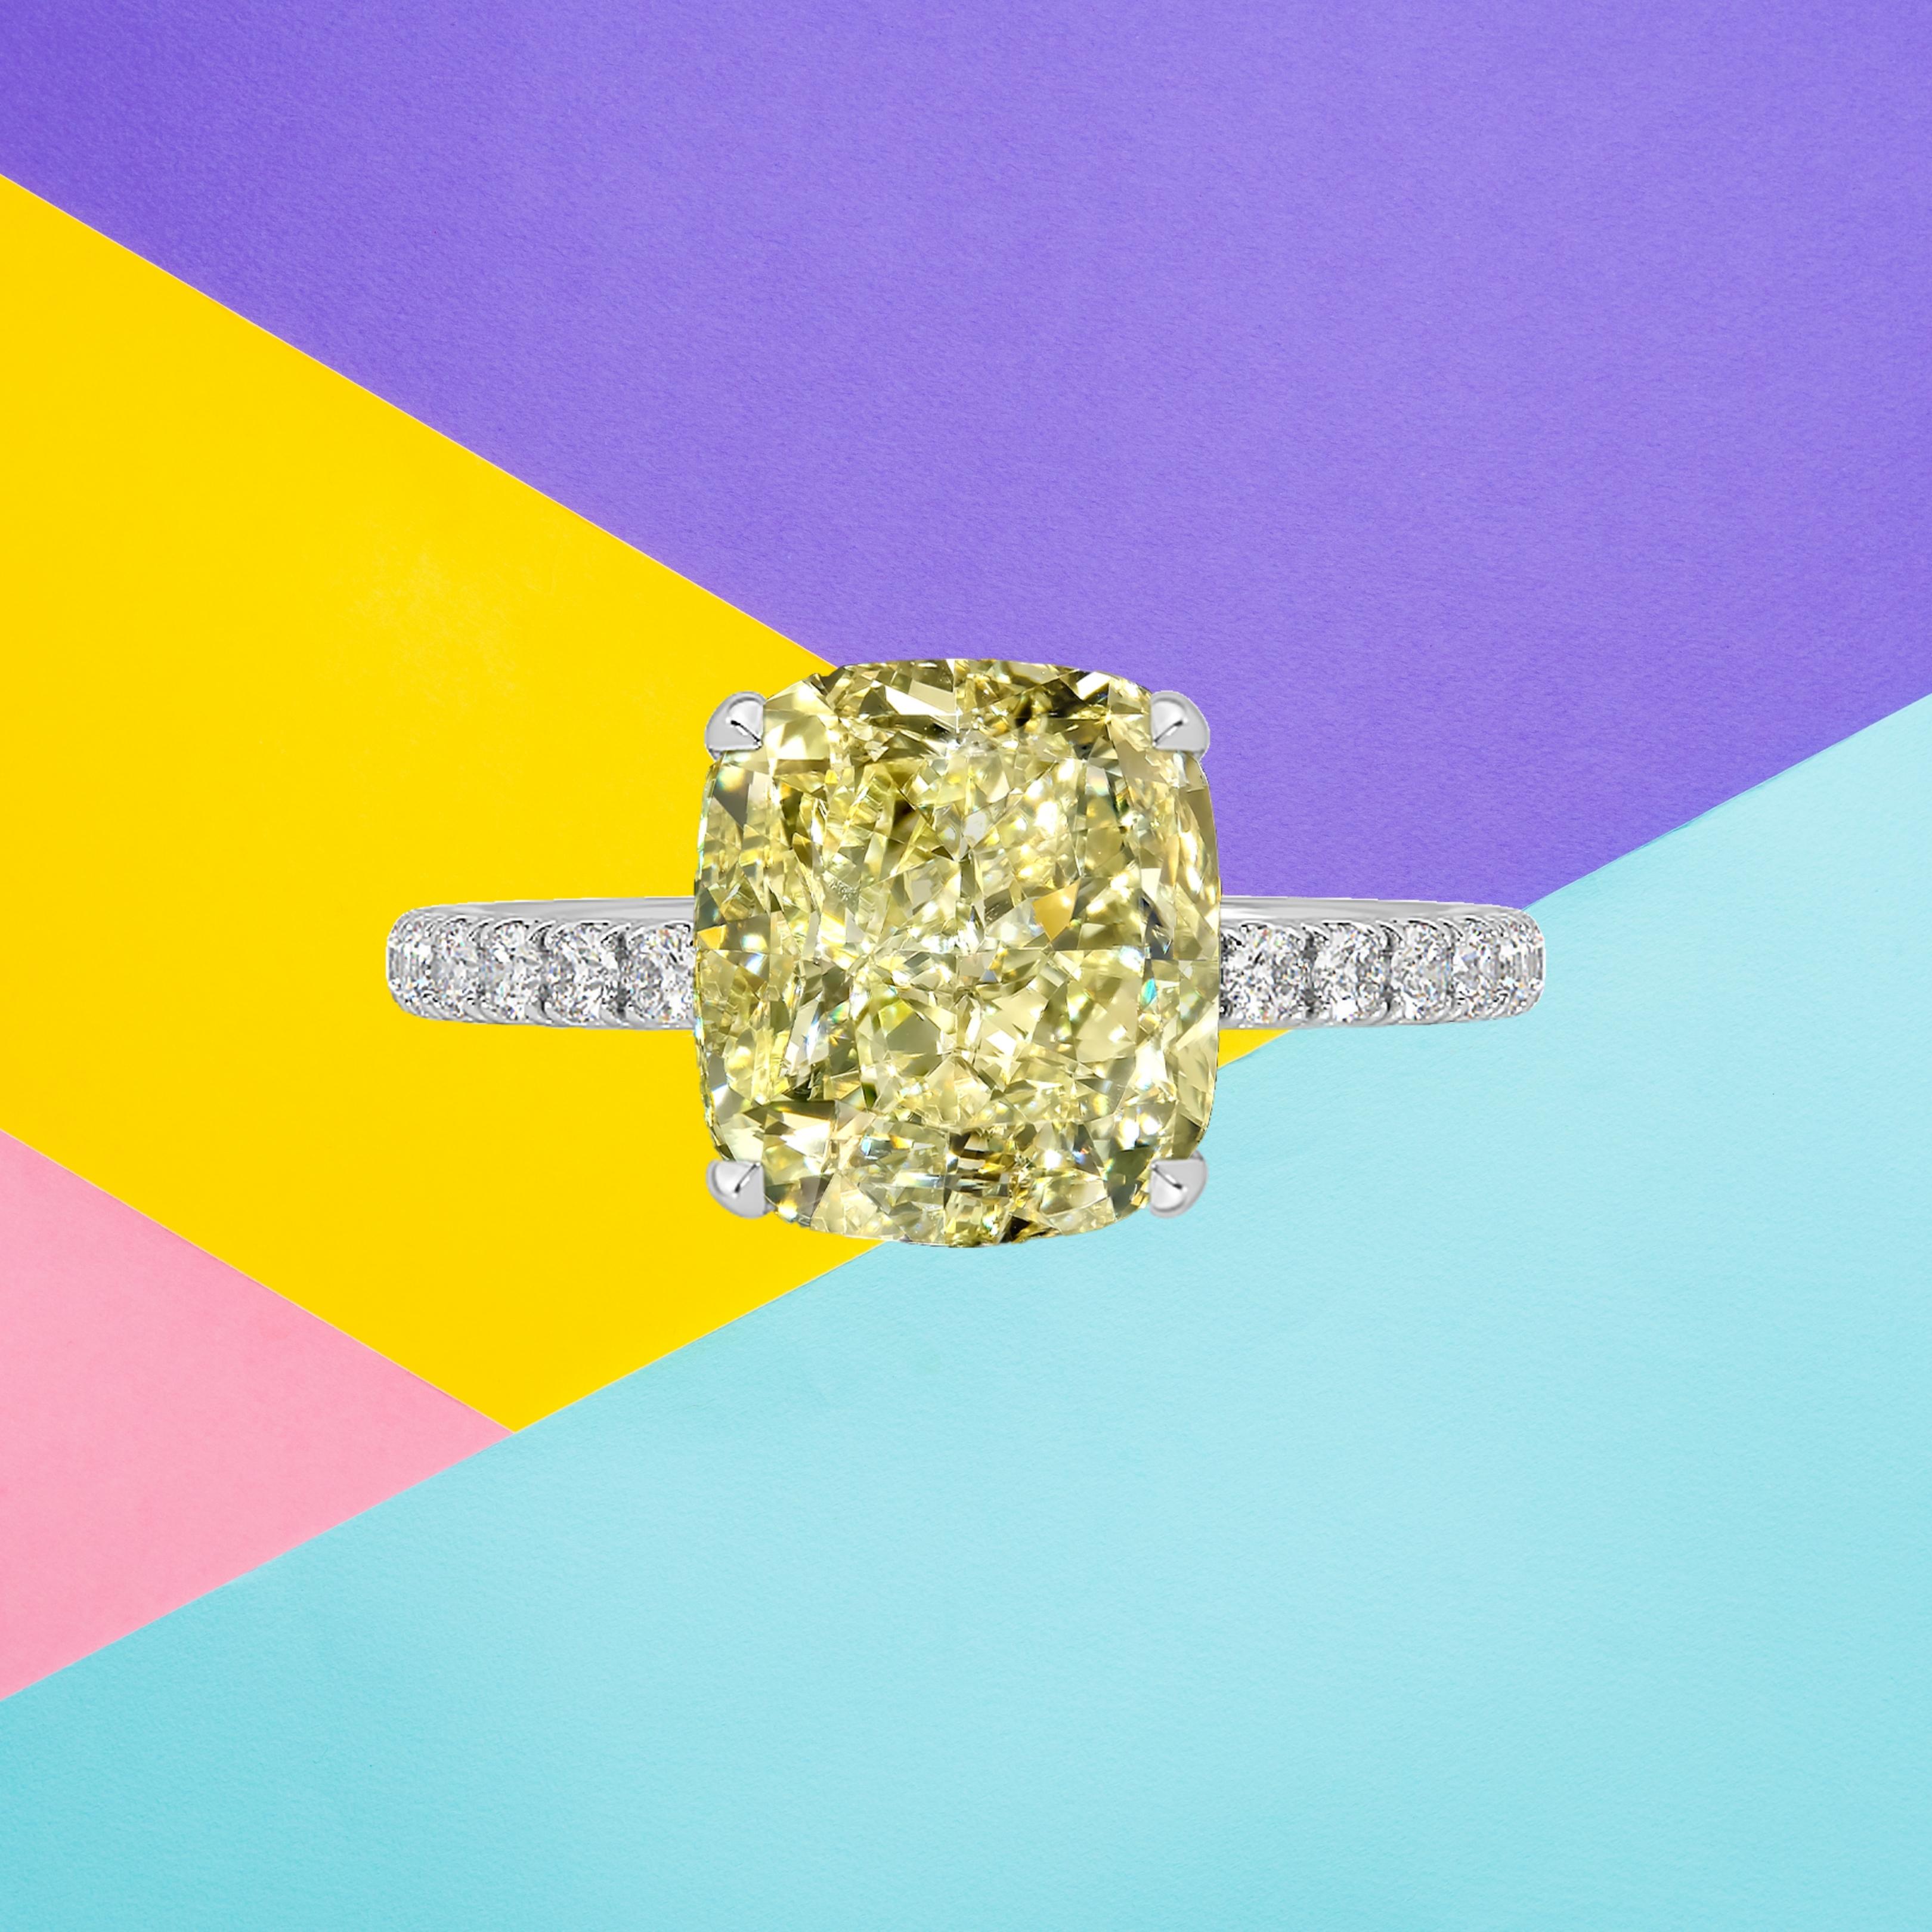 This cushion cut diamond weighs 3.00 carat and is certified 'Fancy Yellow' color by the Gemological Institute of America. The GIA has also assigned a VVS1 grading to the stone. The diamond has been inscribed with the certificate number to guarantee